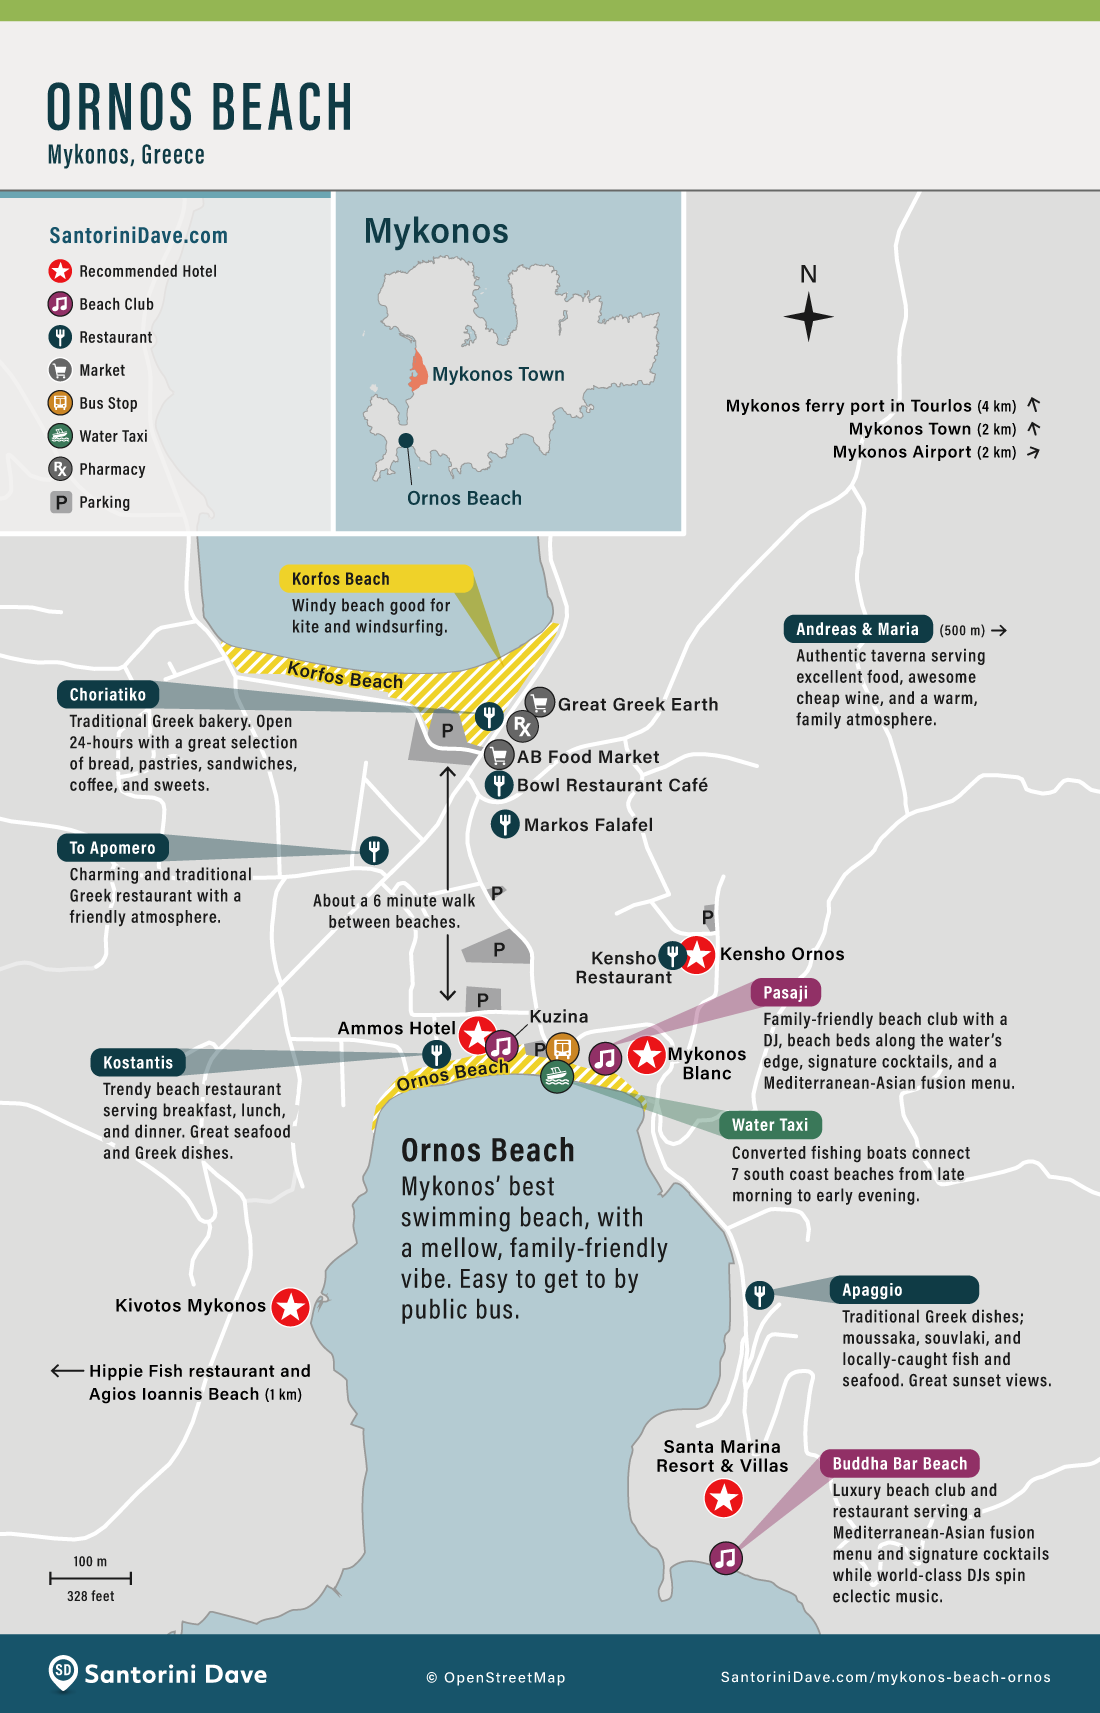 Map showing the area surrounding Ornos Beach, including restaurants, beach clubs, and hotels